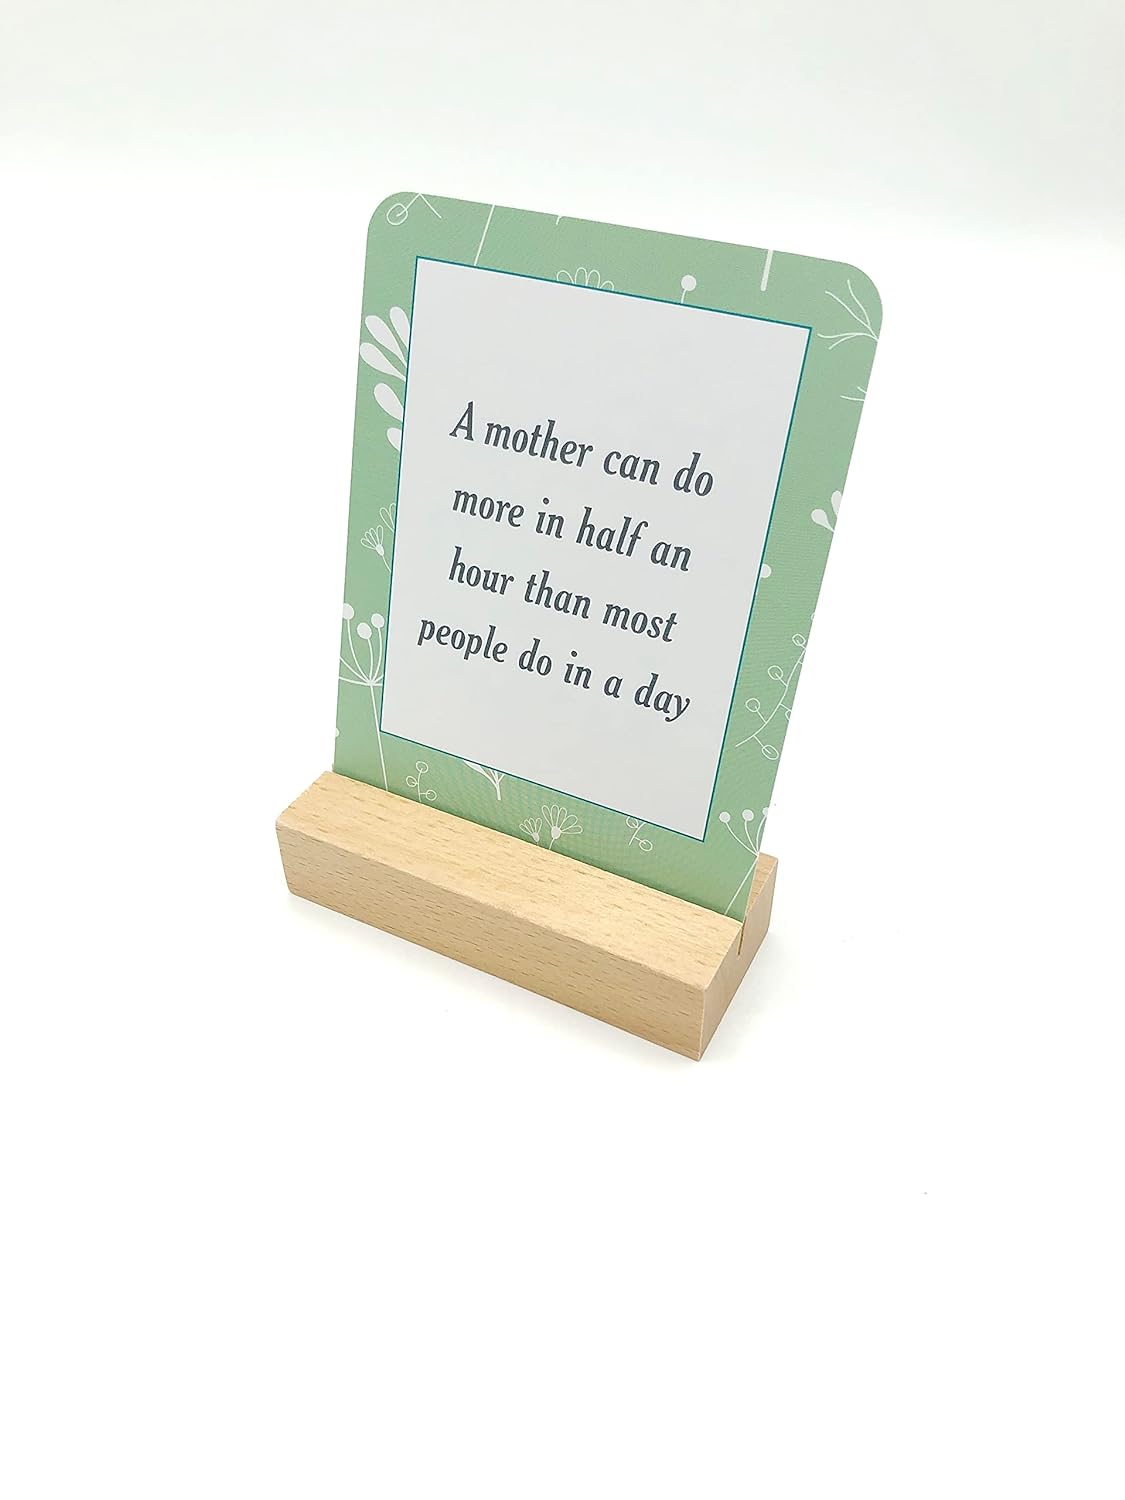 For The Best Mom Ever: 52 Cards To Celebrate The Most Special Person